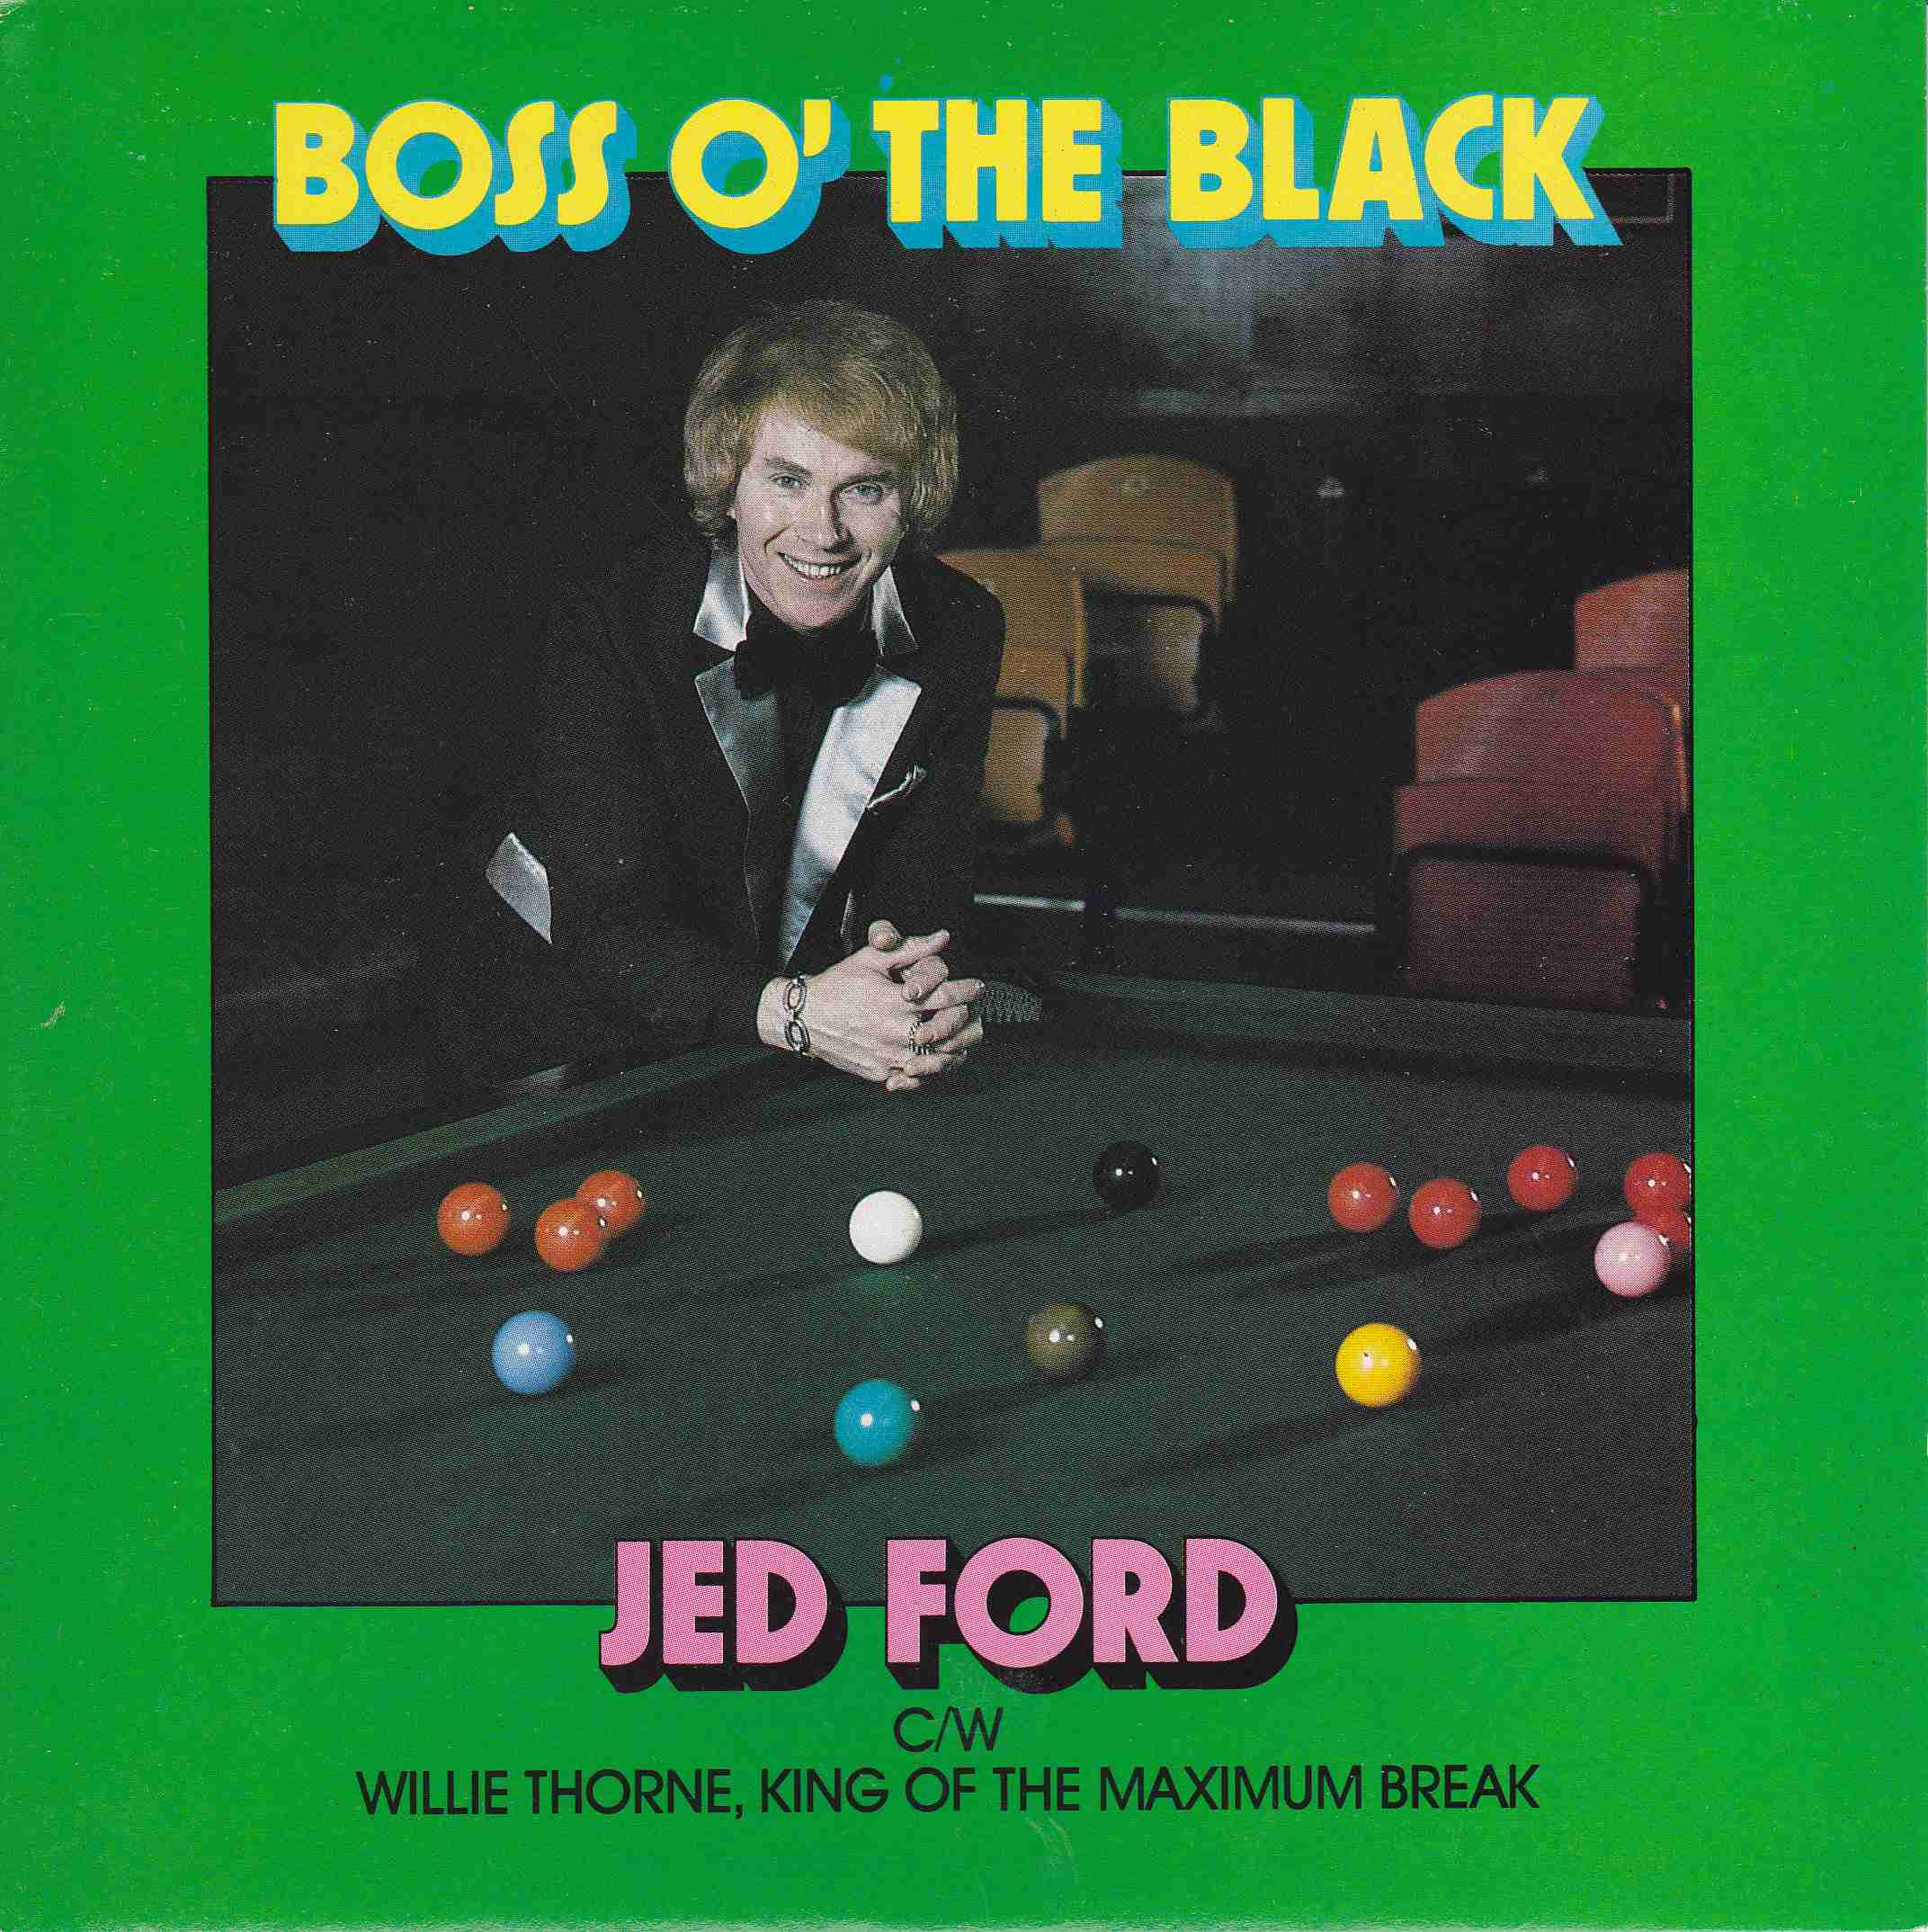 Picture of Boss o' the black by artist Jed Ford from the BBC singles - Records and Tapes library